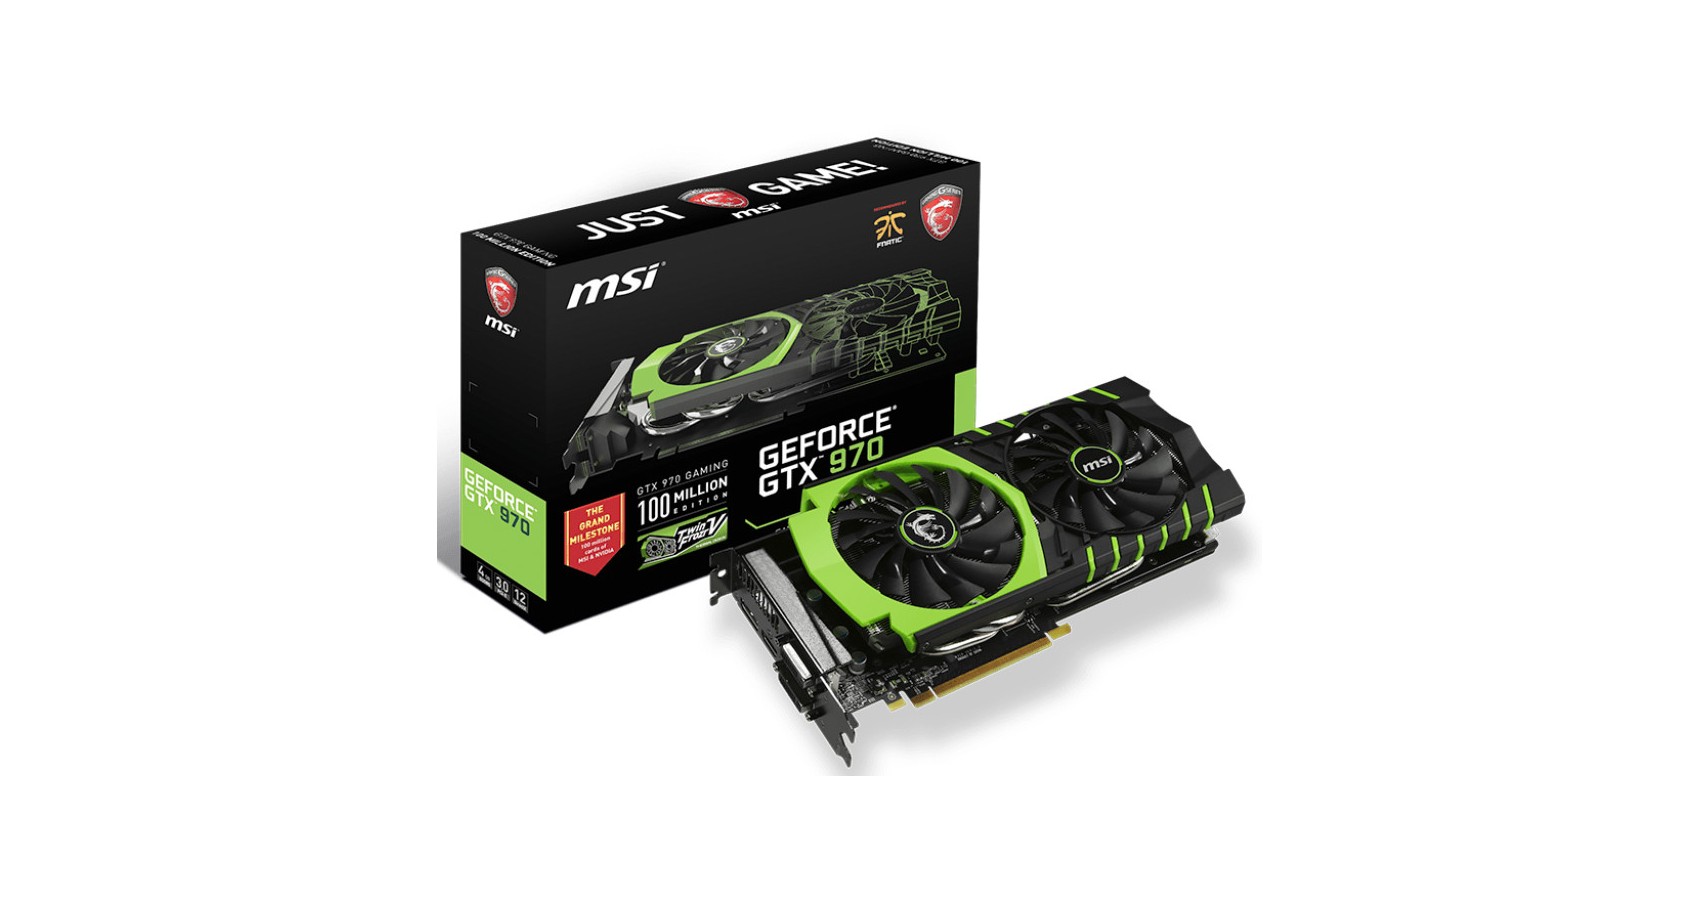 Msi Intros Gtx 960 And 970 Limited Edition Graphics Cards To Celebrate 100 Million Sales